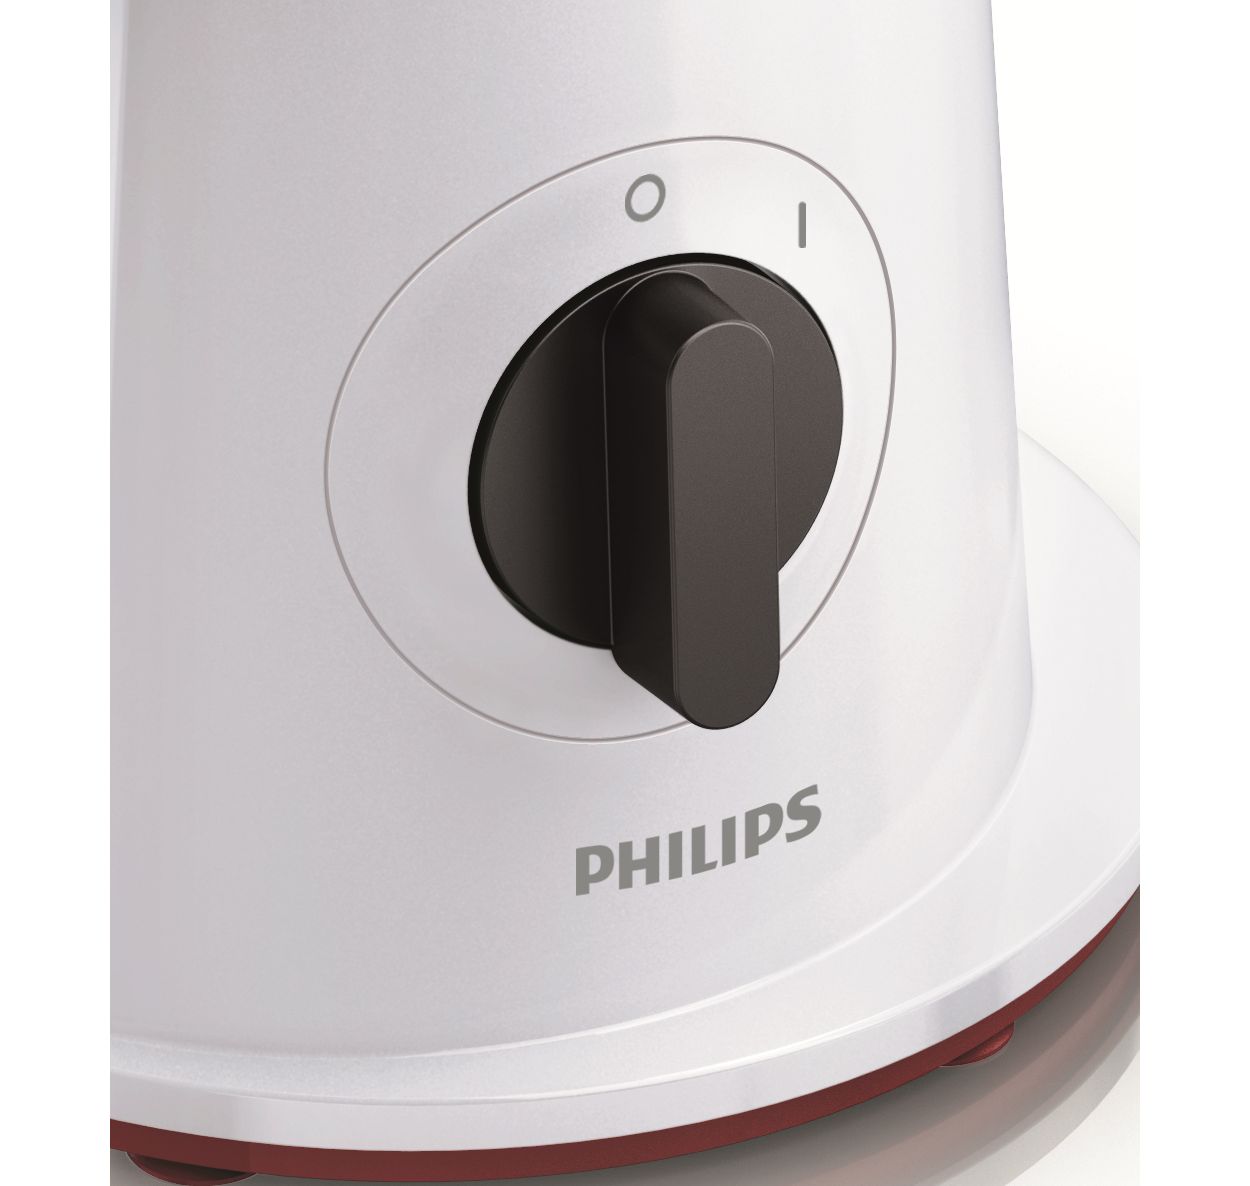 PHILIPS VIVA COLLECTION SALAD MAKER – QING Moments